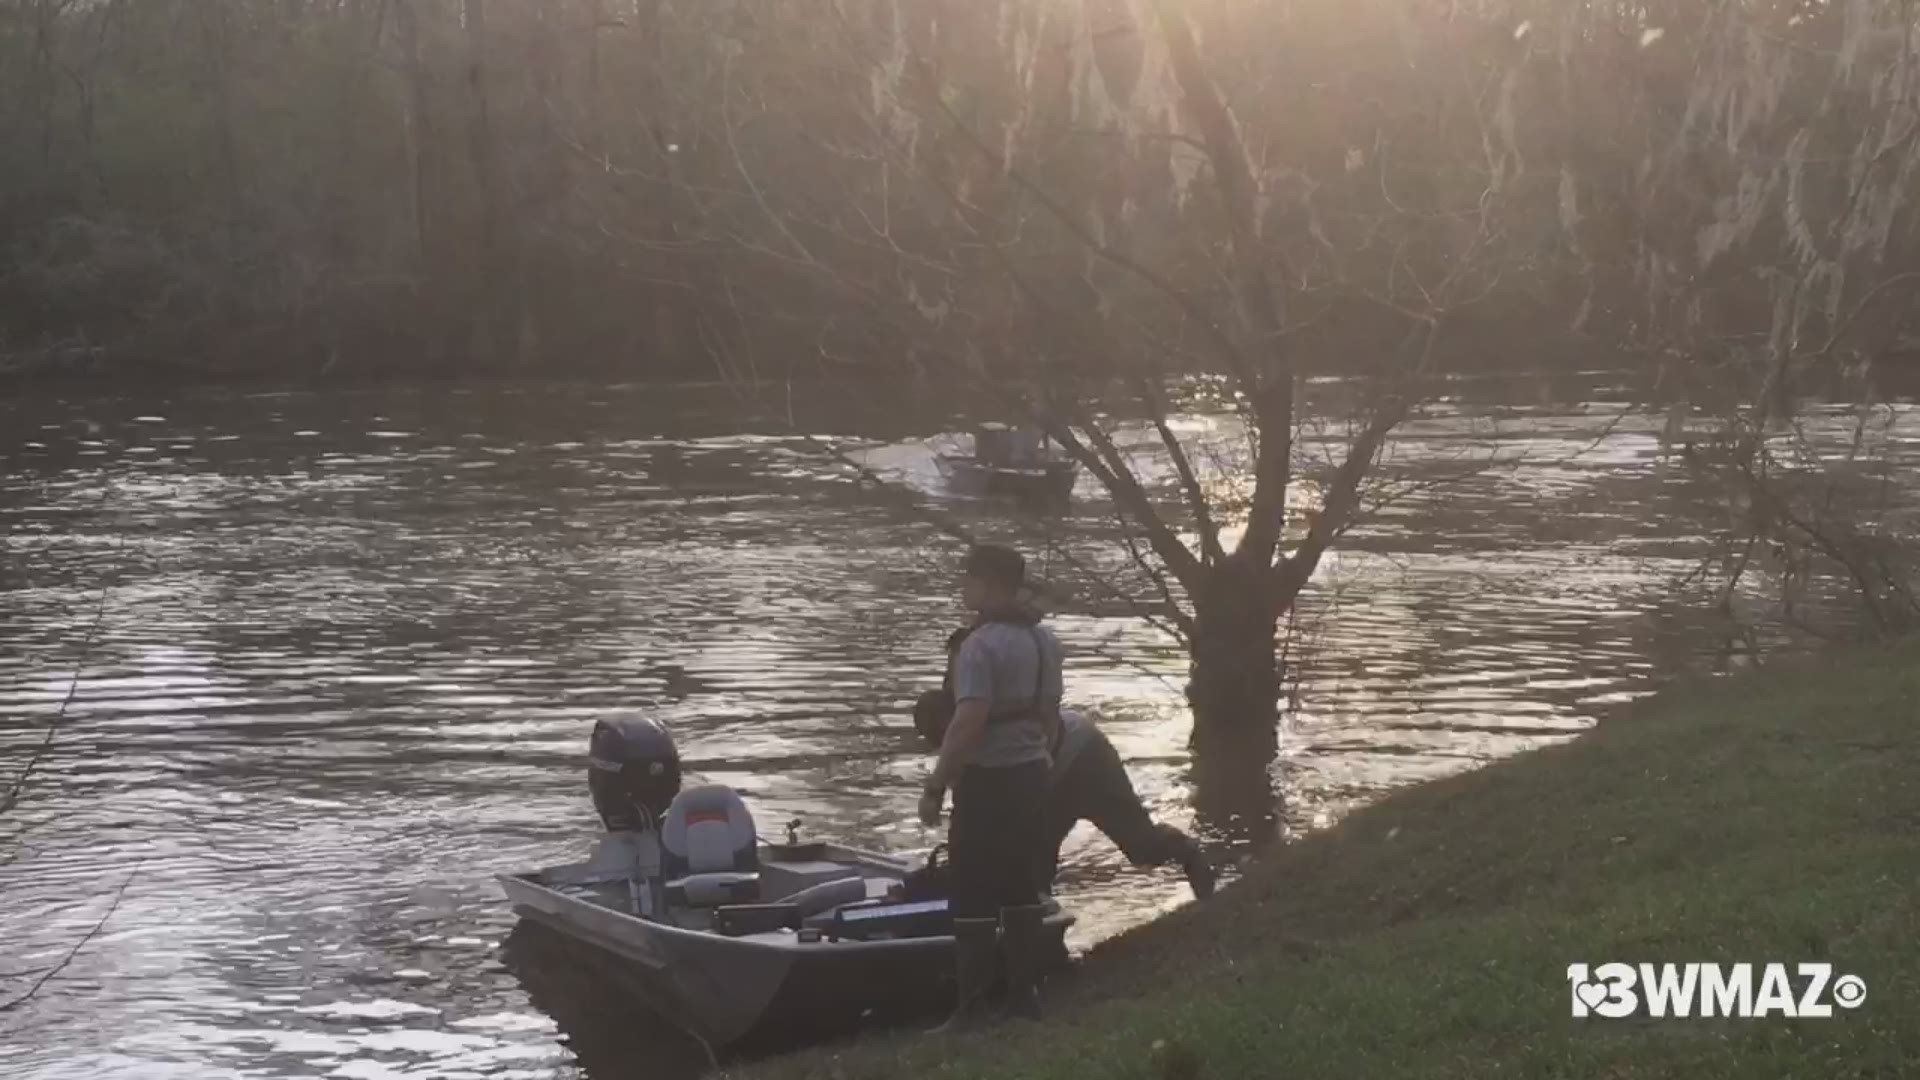 Crews searching the Ocmulgee River for a missing boater